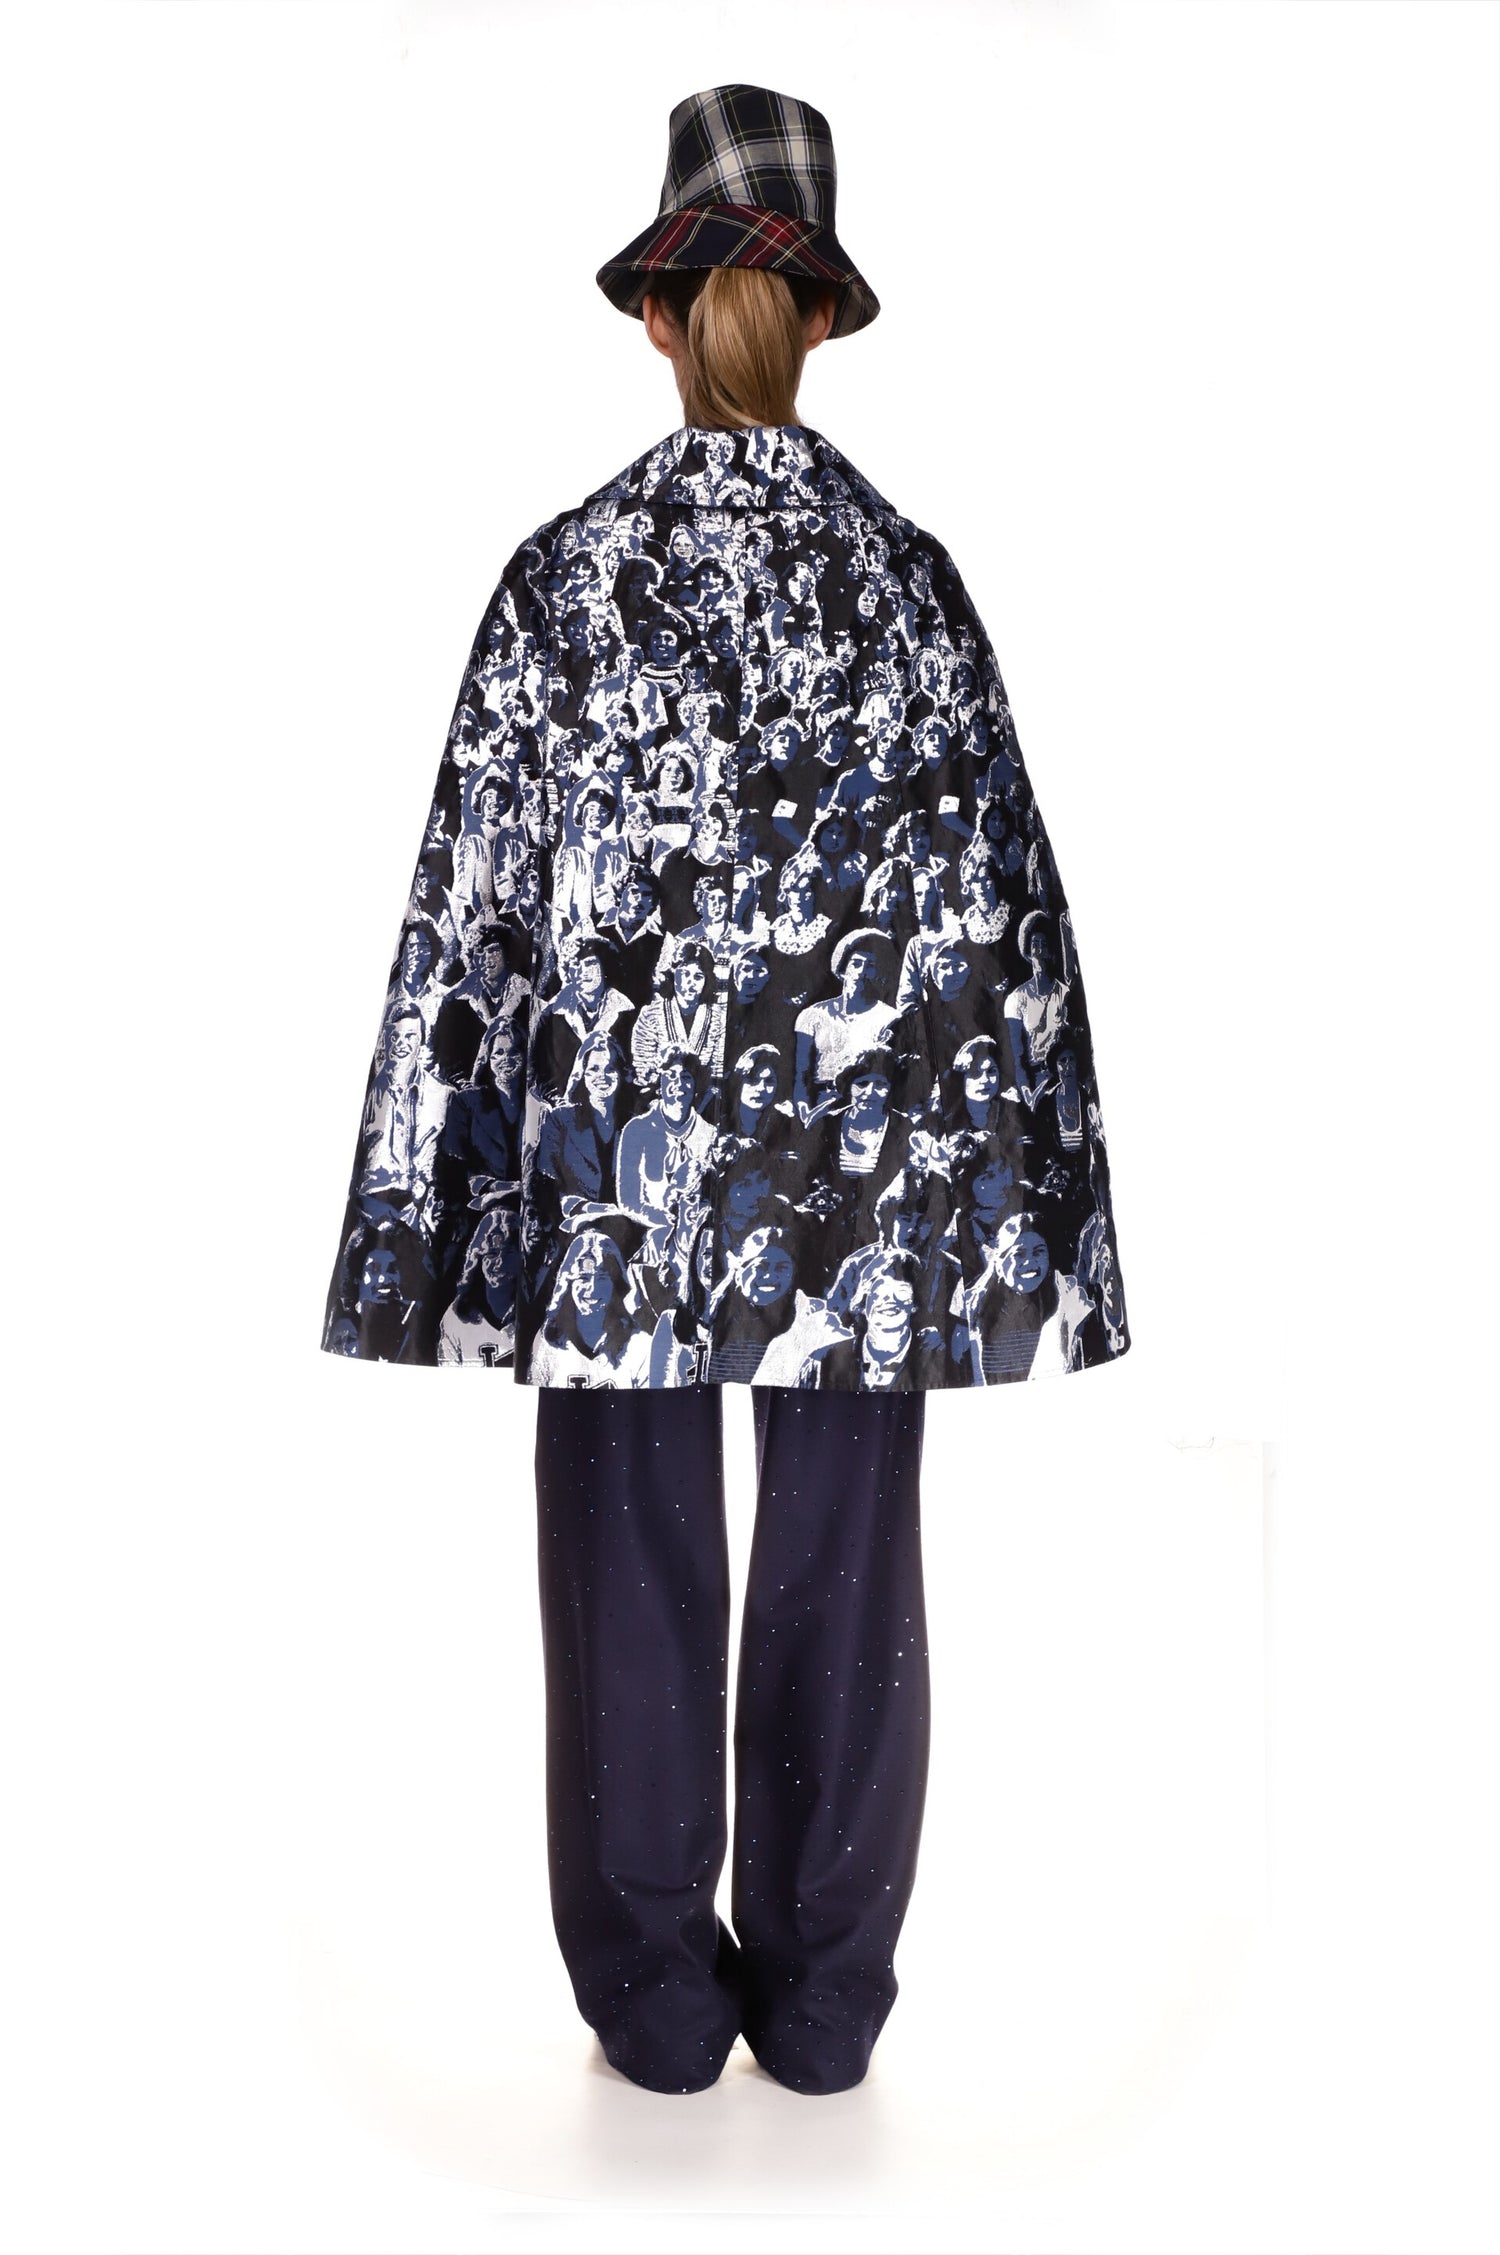 'IN WITH THE CROWD' SHORTIE CAPE - BLAZERS - Libertine